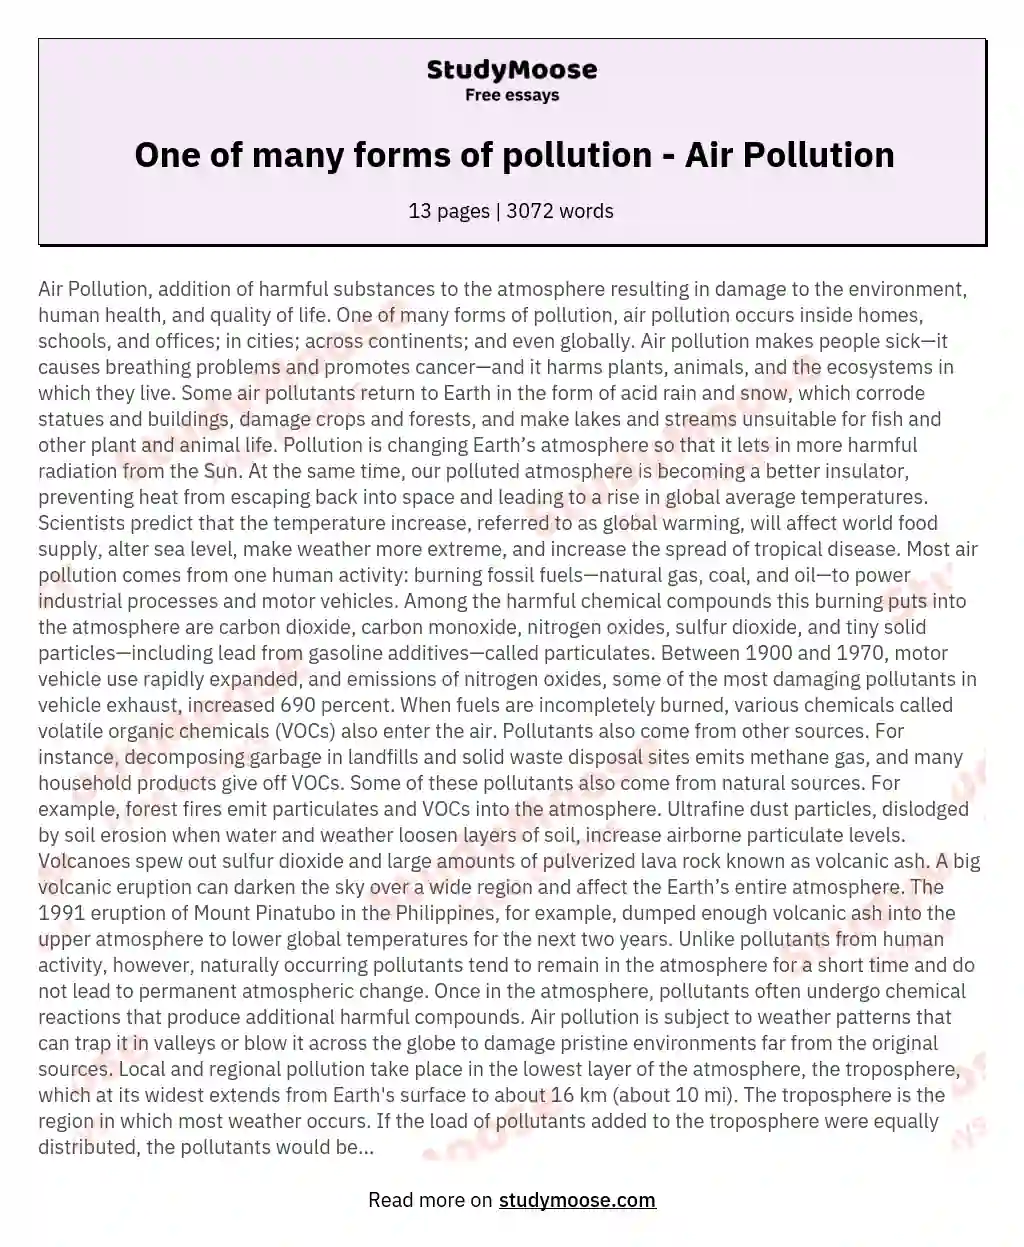 One of many forms of pollution - Air Pollution essay